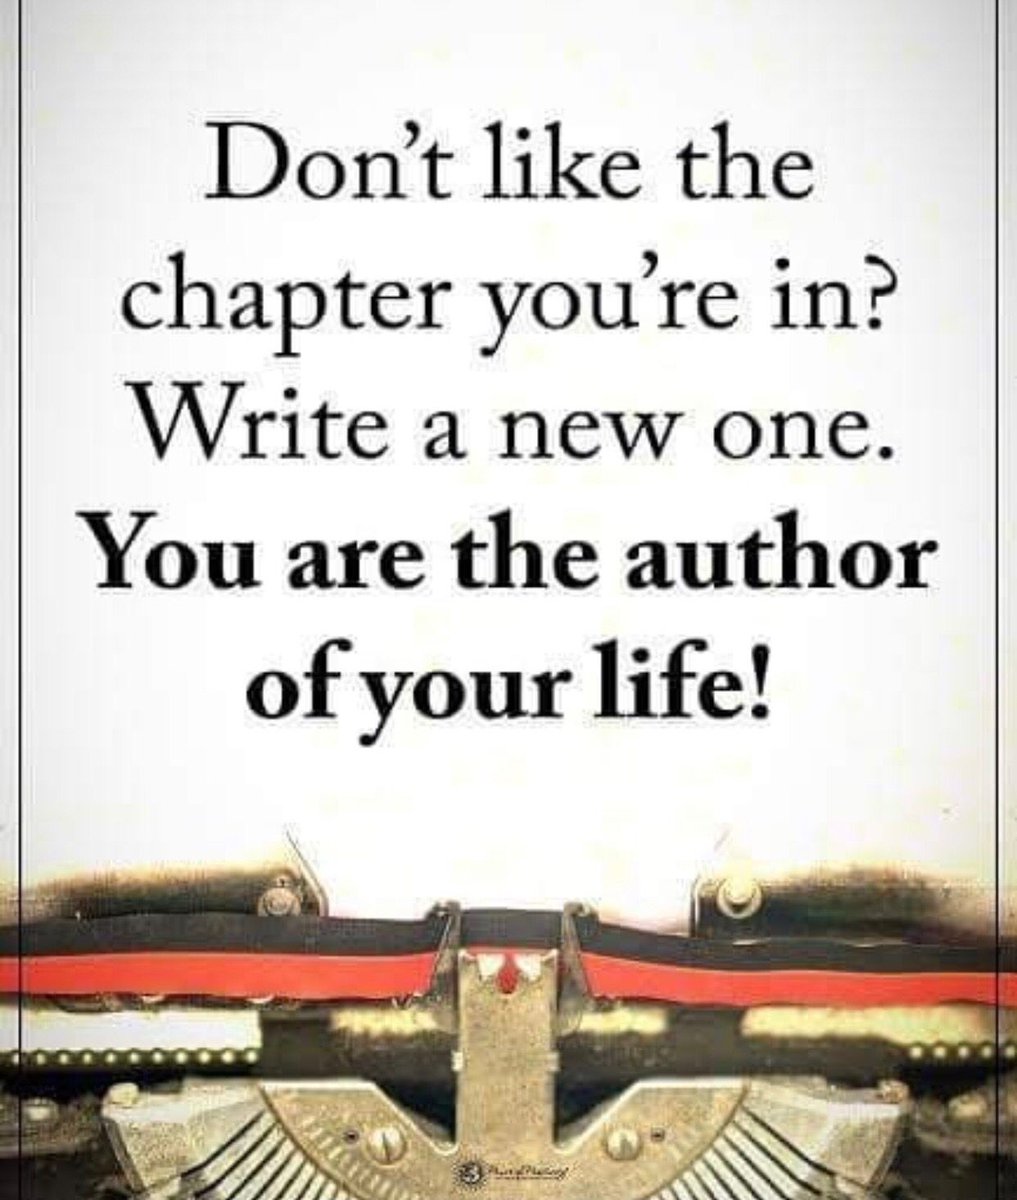 Don’t forget you’re are in charge! Share this post if you agree 

#PositiveMentalAttitude #PositiveVibes #chapter #writer #author #ChangeTheGame #changeyourfuture